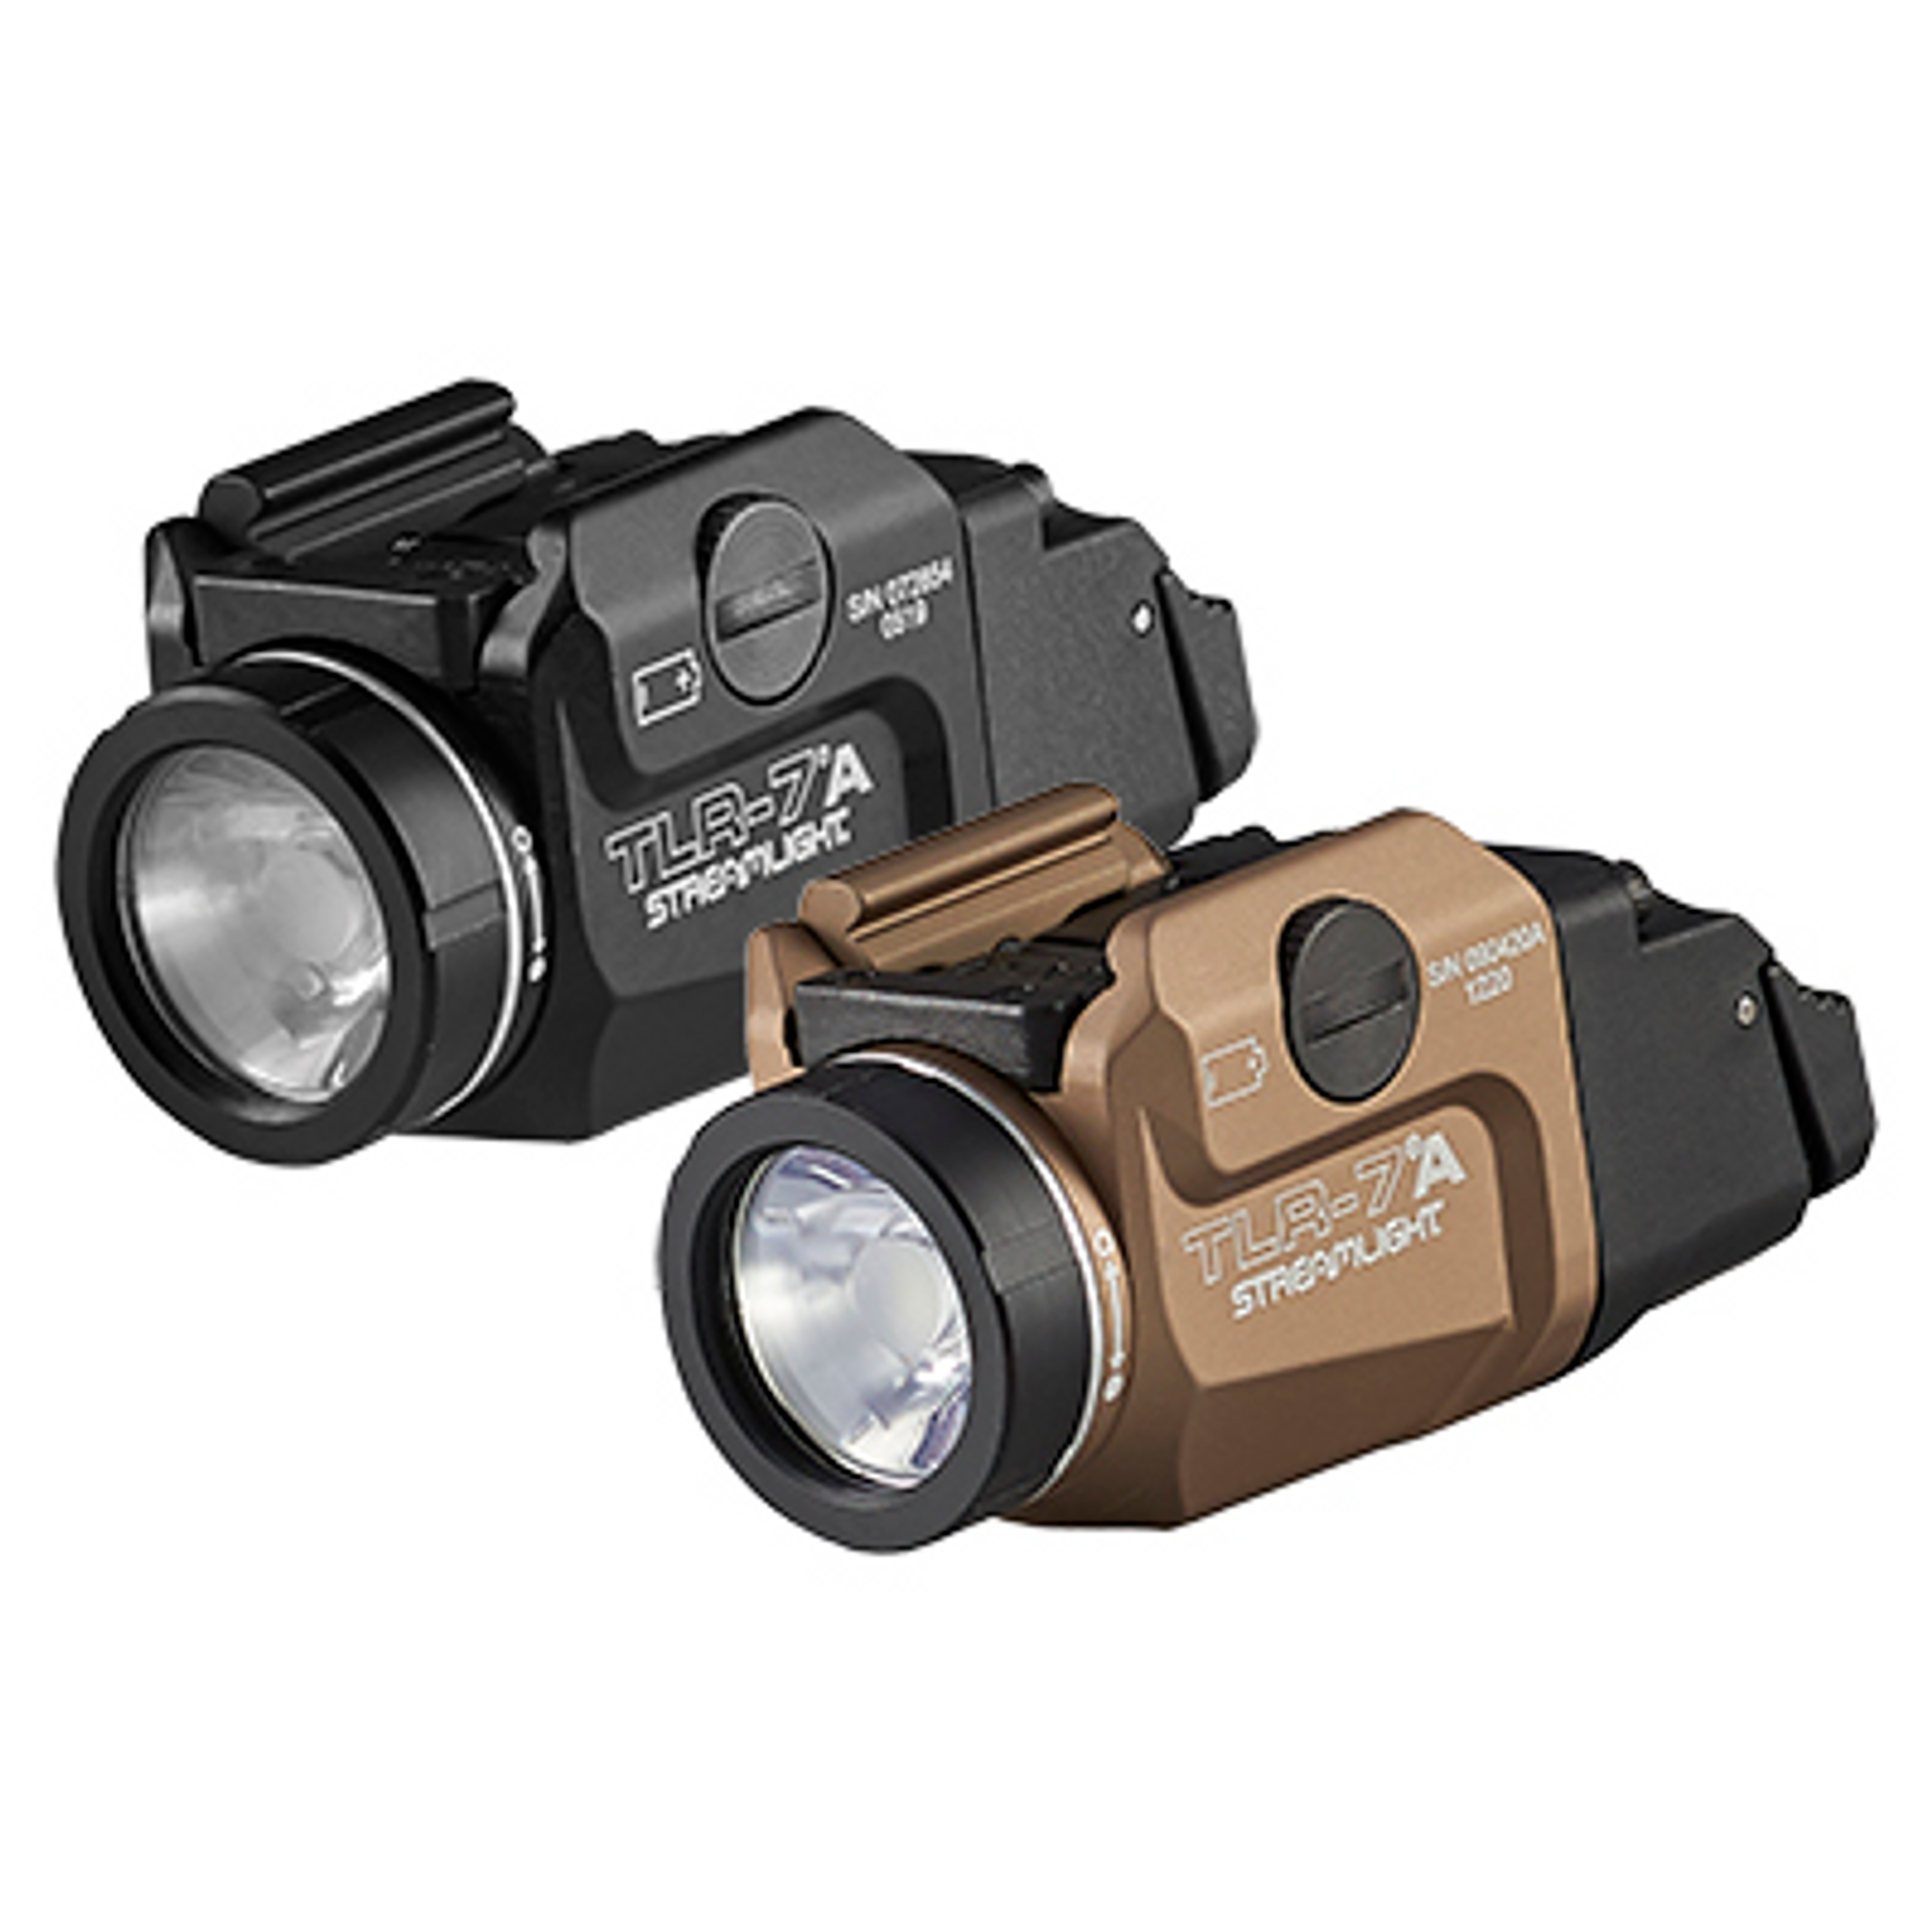 Tlr-7 A Flex  Includes High Switch (mounted) And Low Switch, Lithium Battery, And Key Kit  Fde  Box